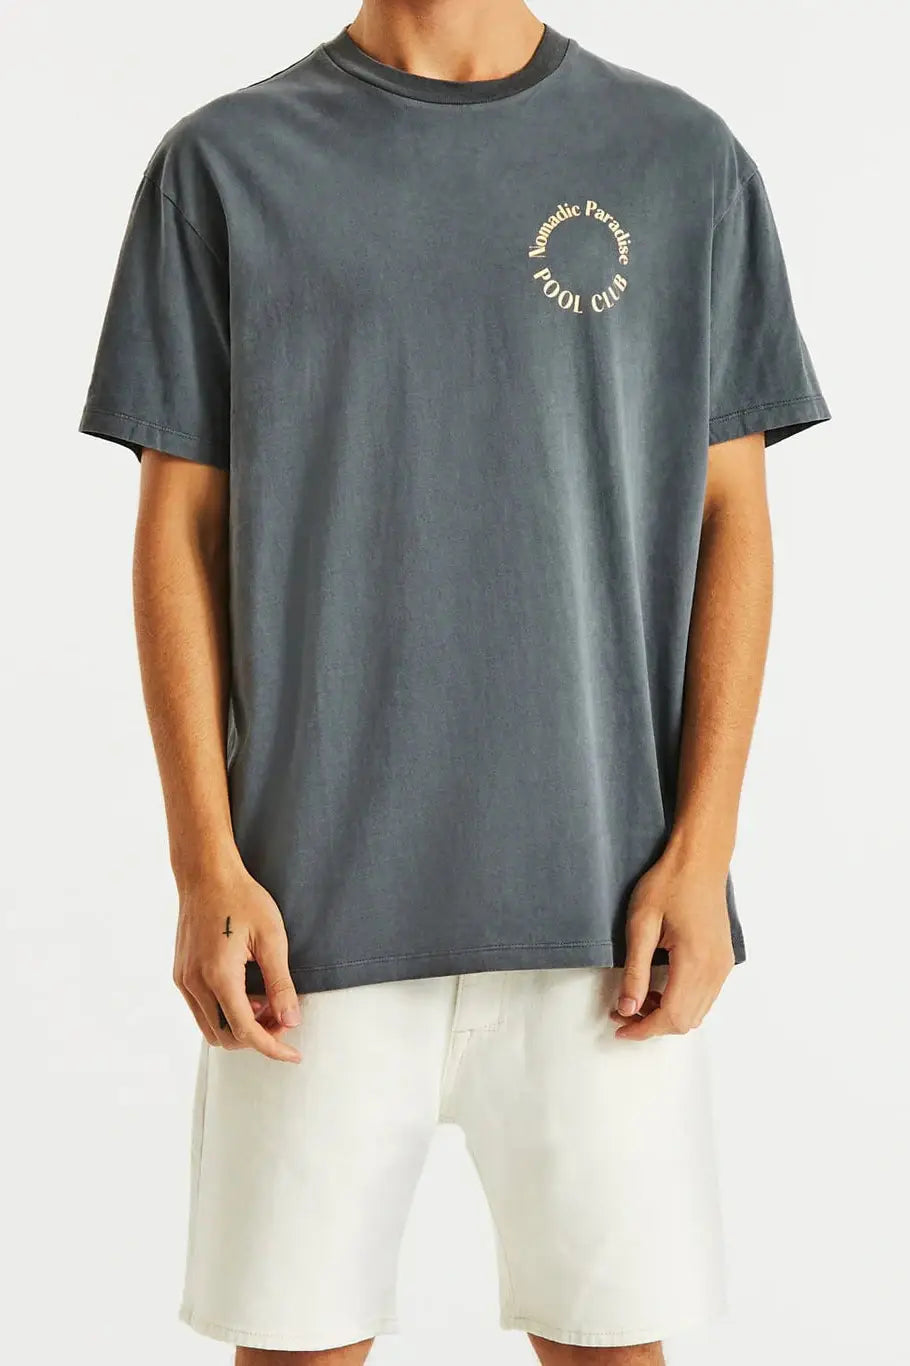 Nomadic paradise connected relaxed t-shirt - pigment asphalt